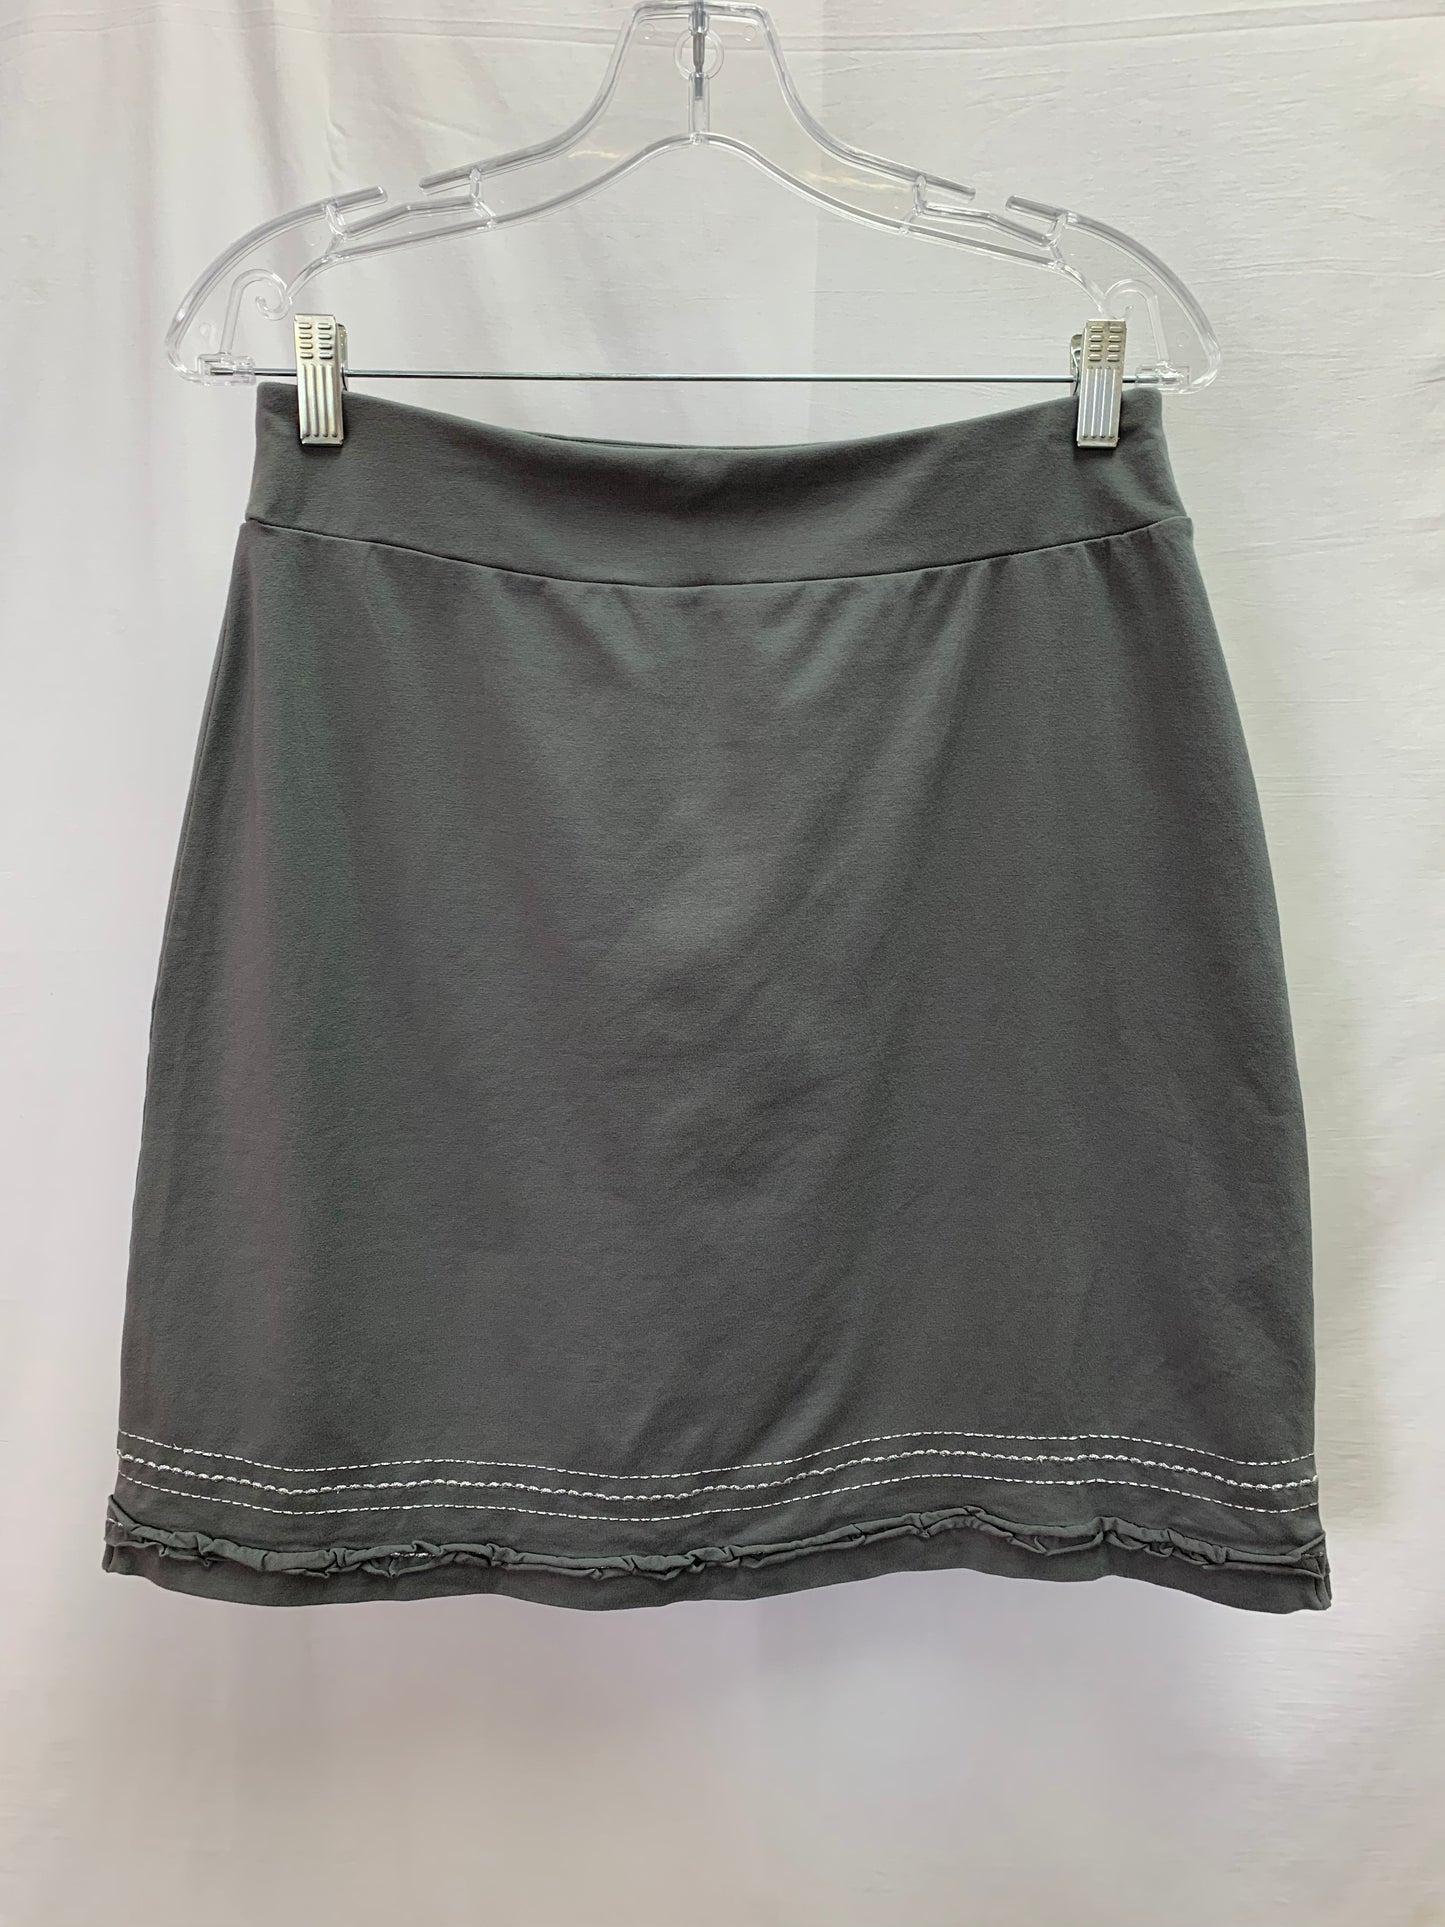 NWT - HANNA ANDERSSON grey knit pull on Skirt - Size M